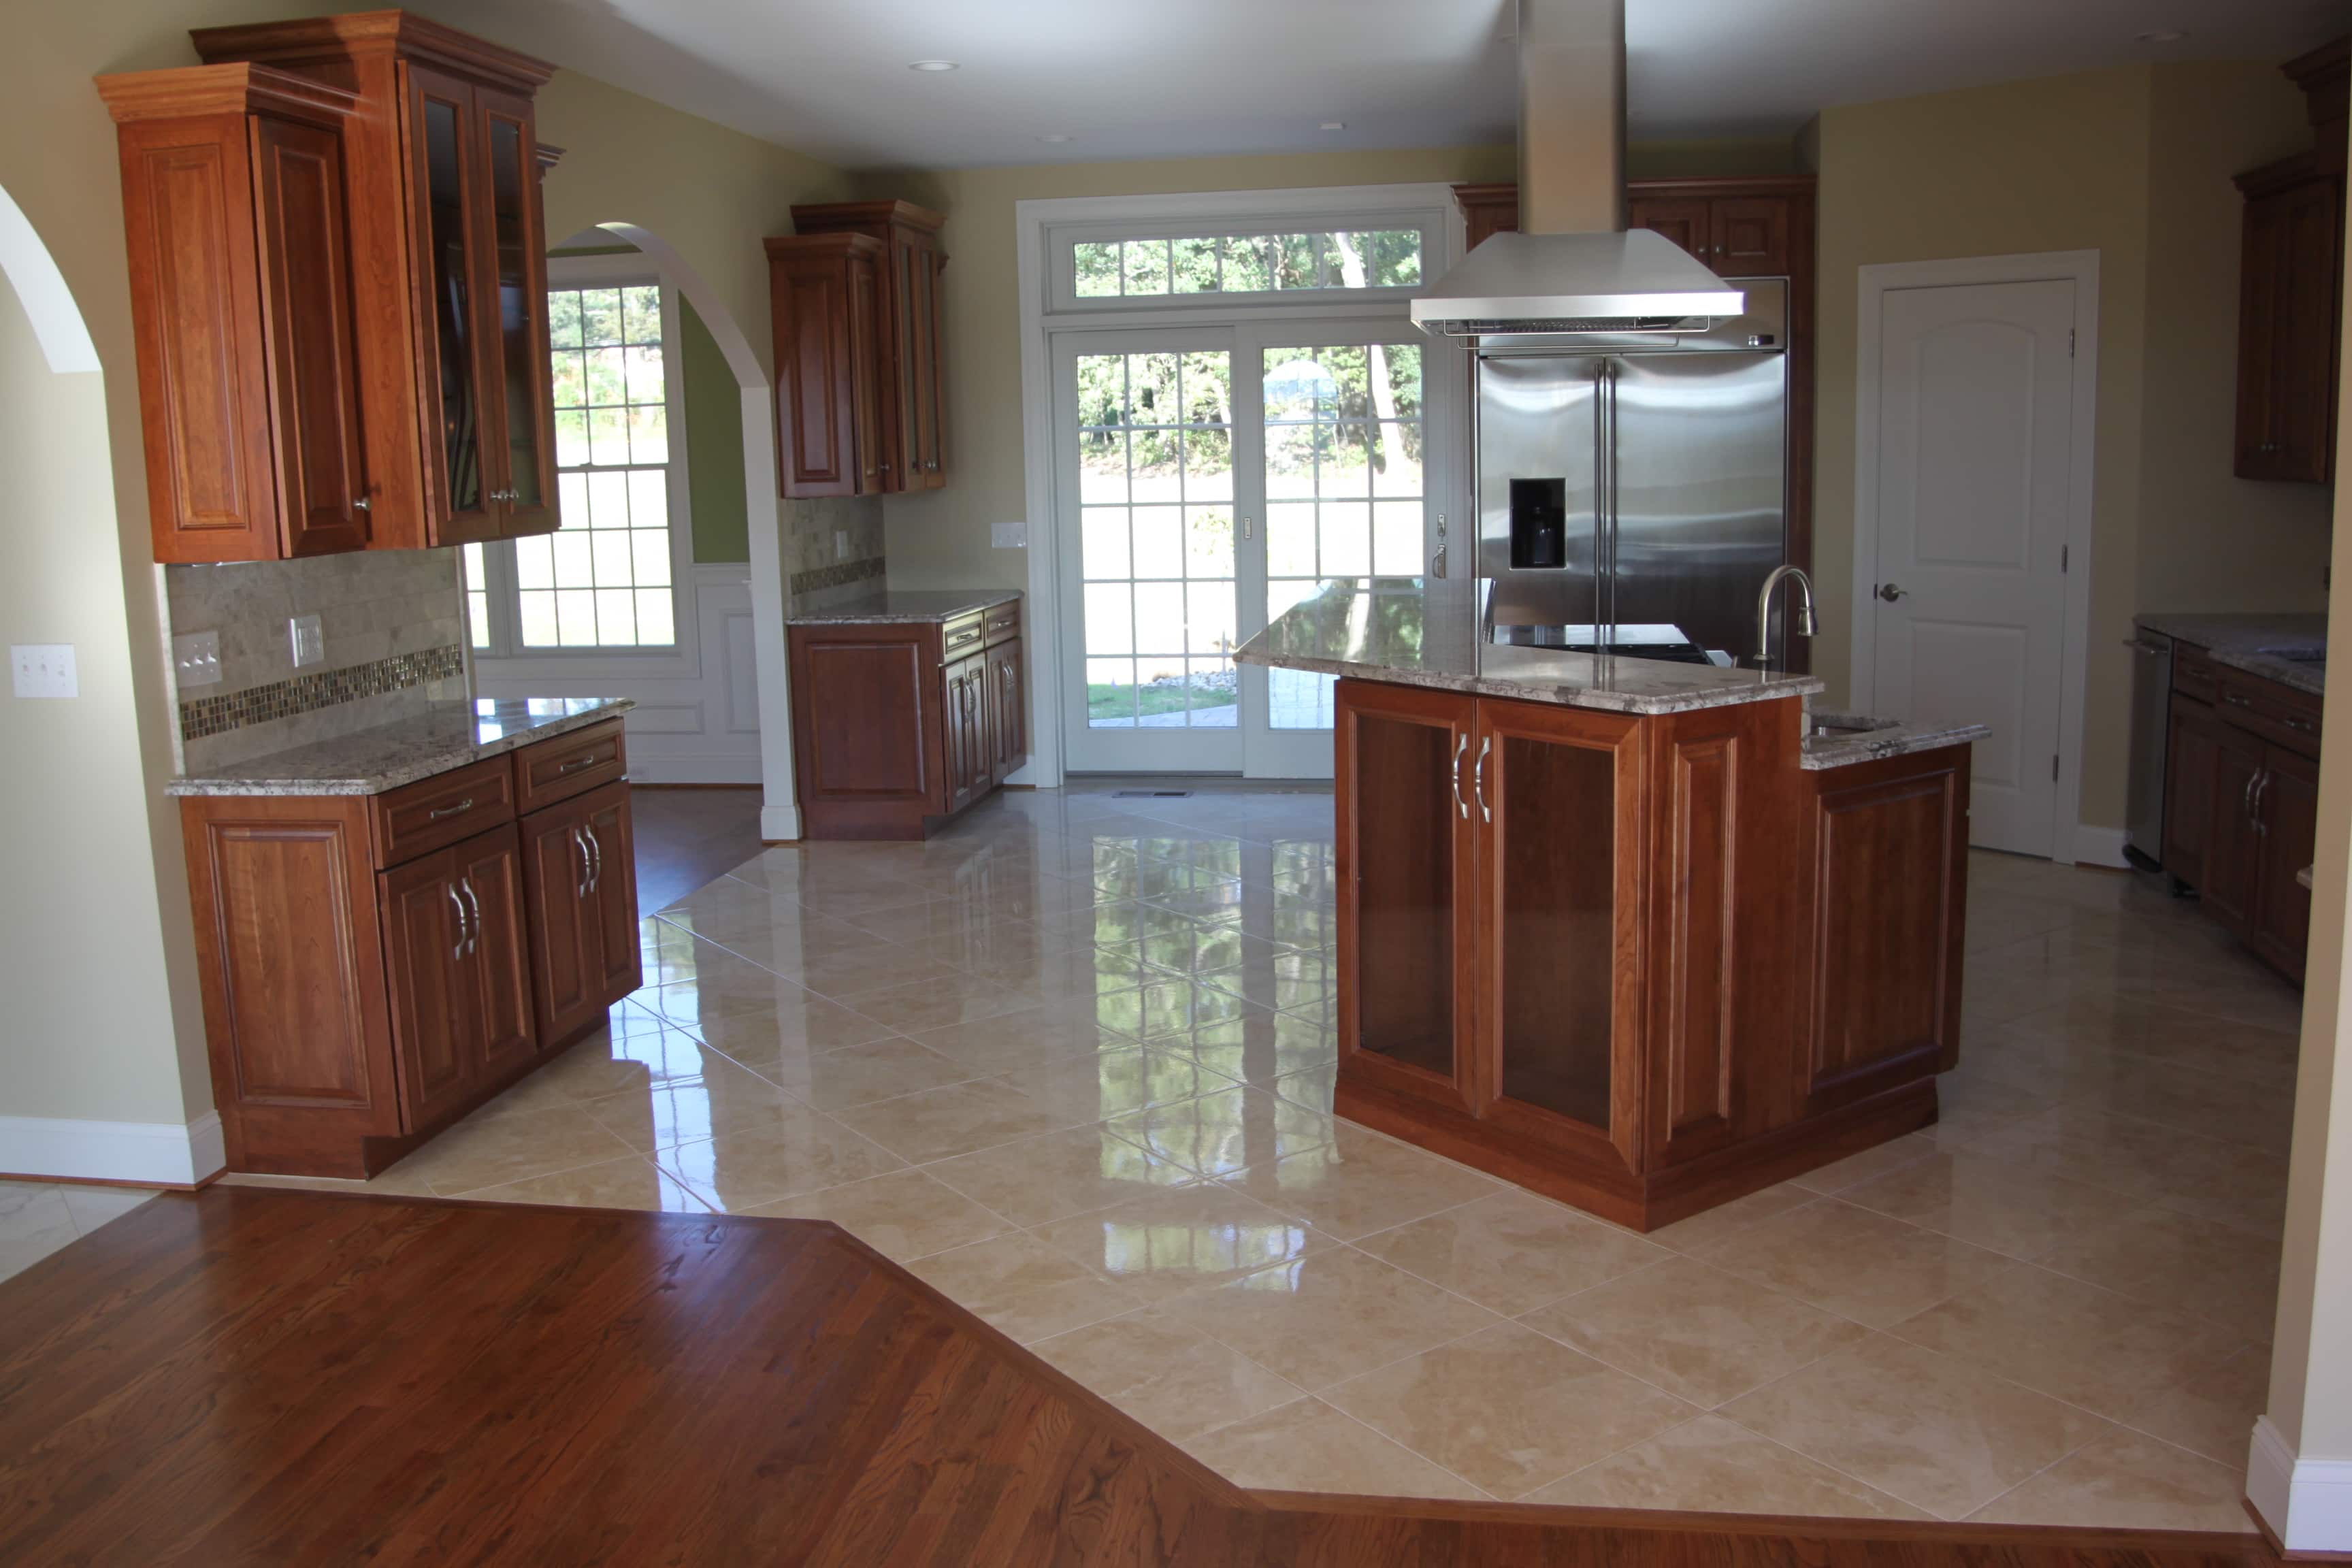 Matching Countertops To Cabinets, Tile And Hardwood Floor Combinations